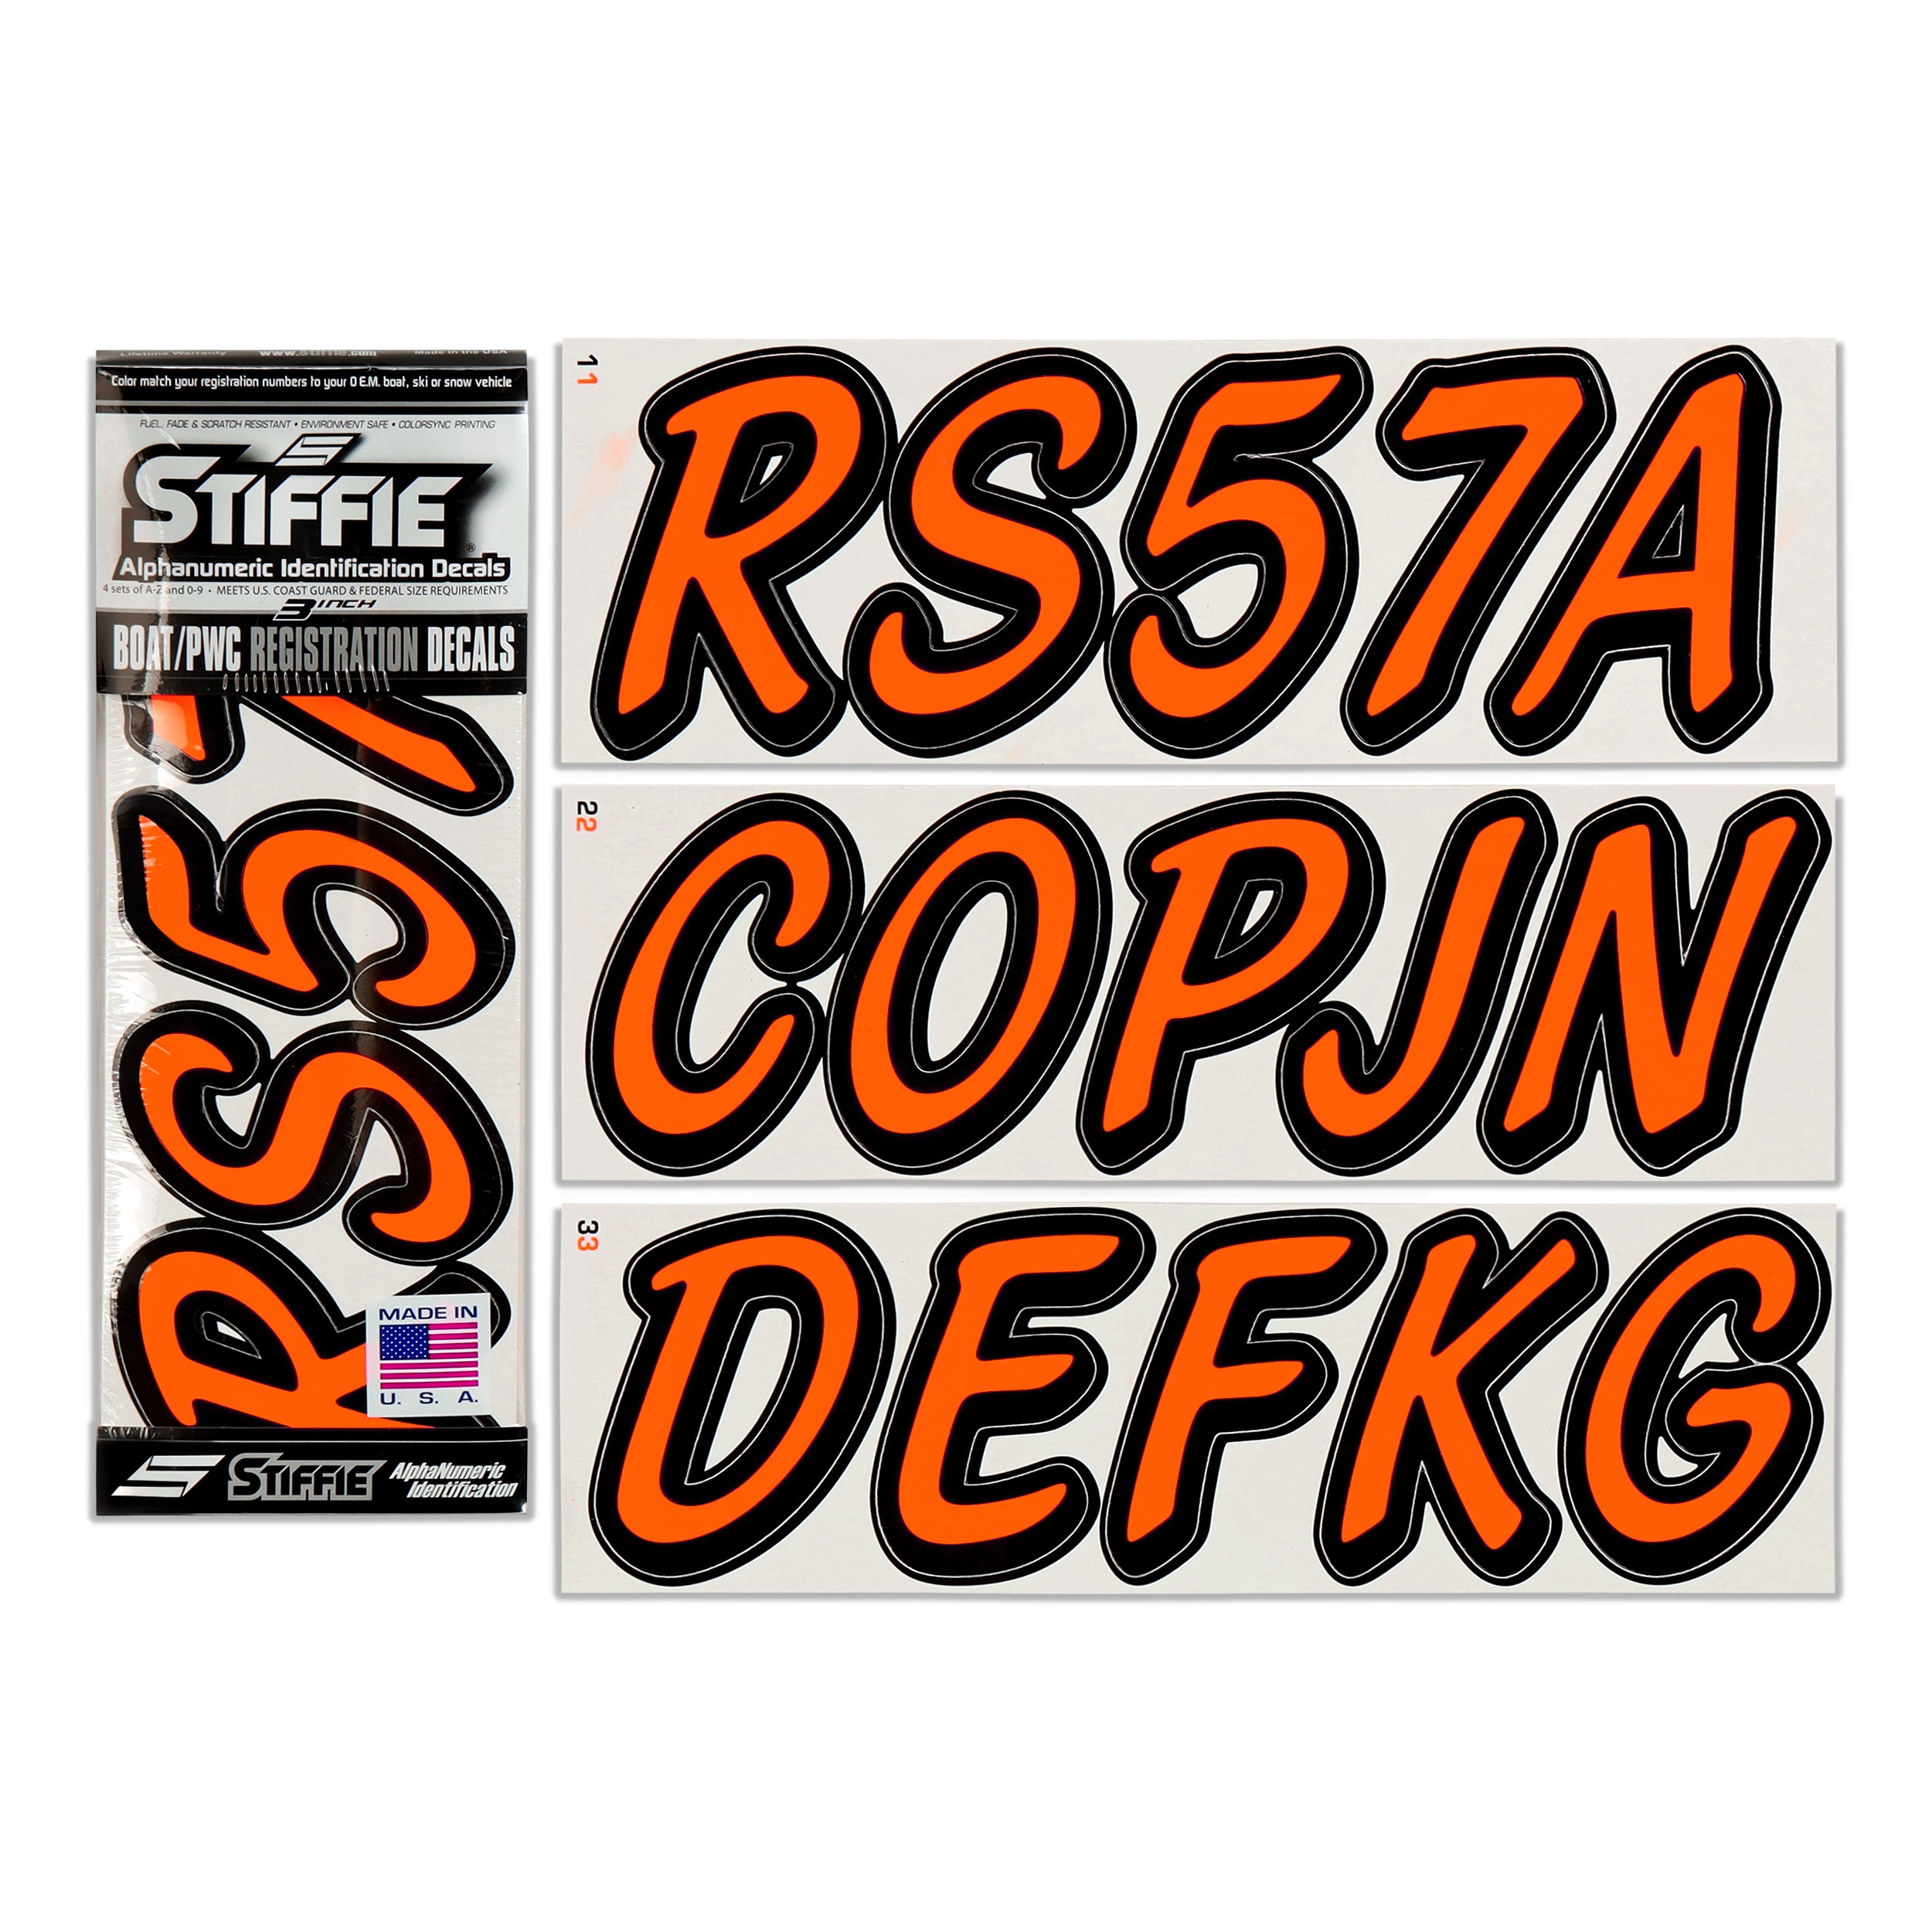 STIFFIE Whipline Solid Electric Orange/Black 3" Alpha-Numeric Registration Identification Numbers Stickers Decals for Boats & Personal Watercraft